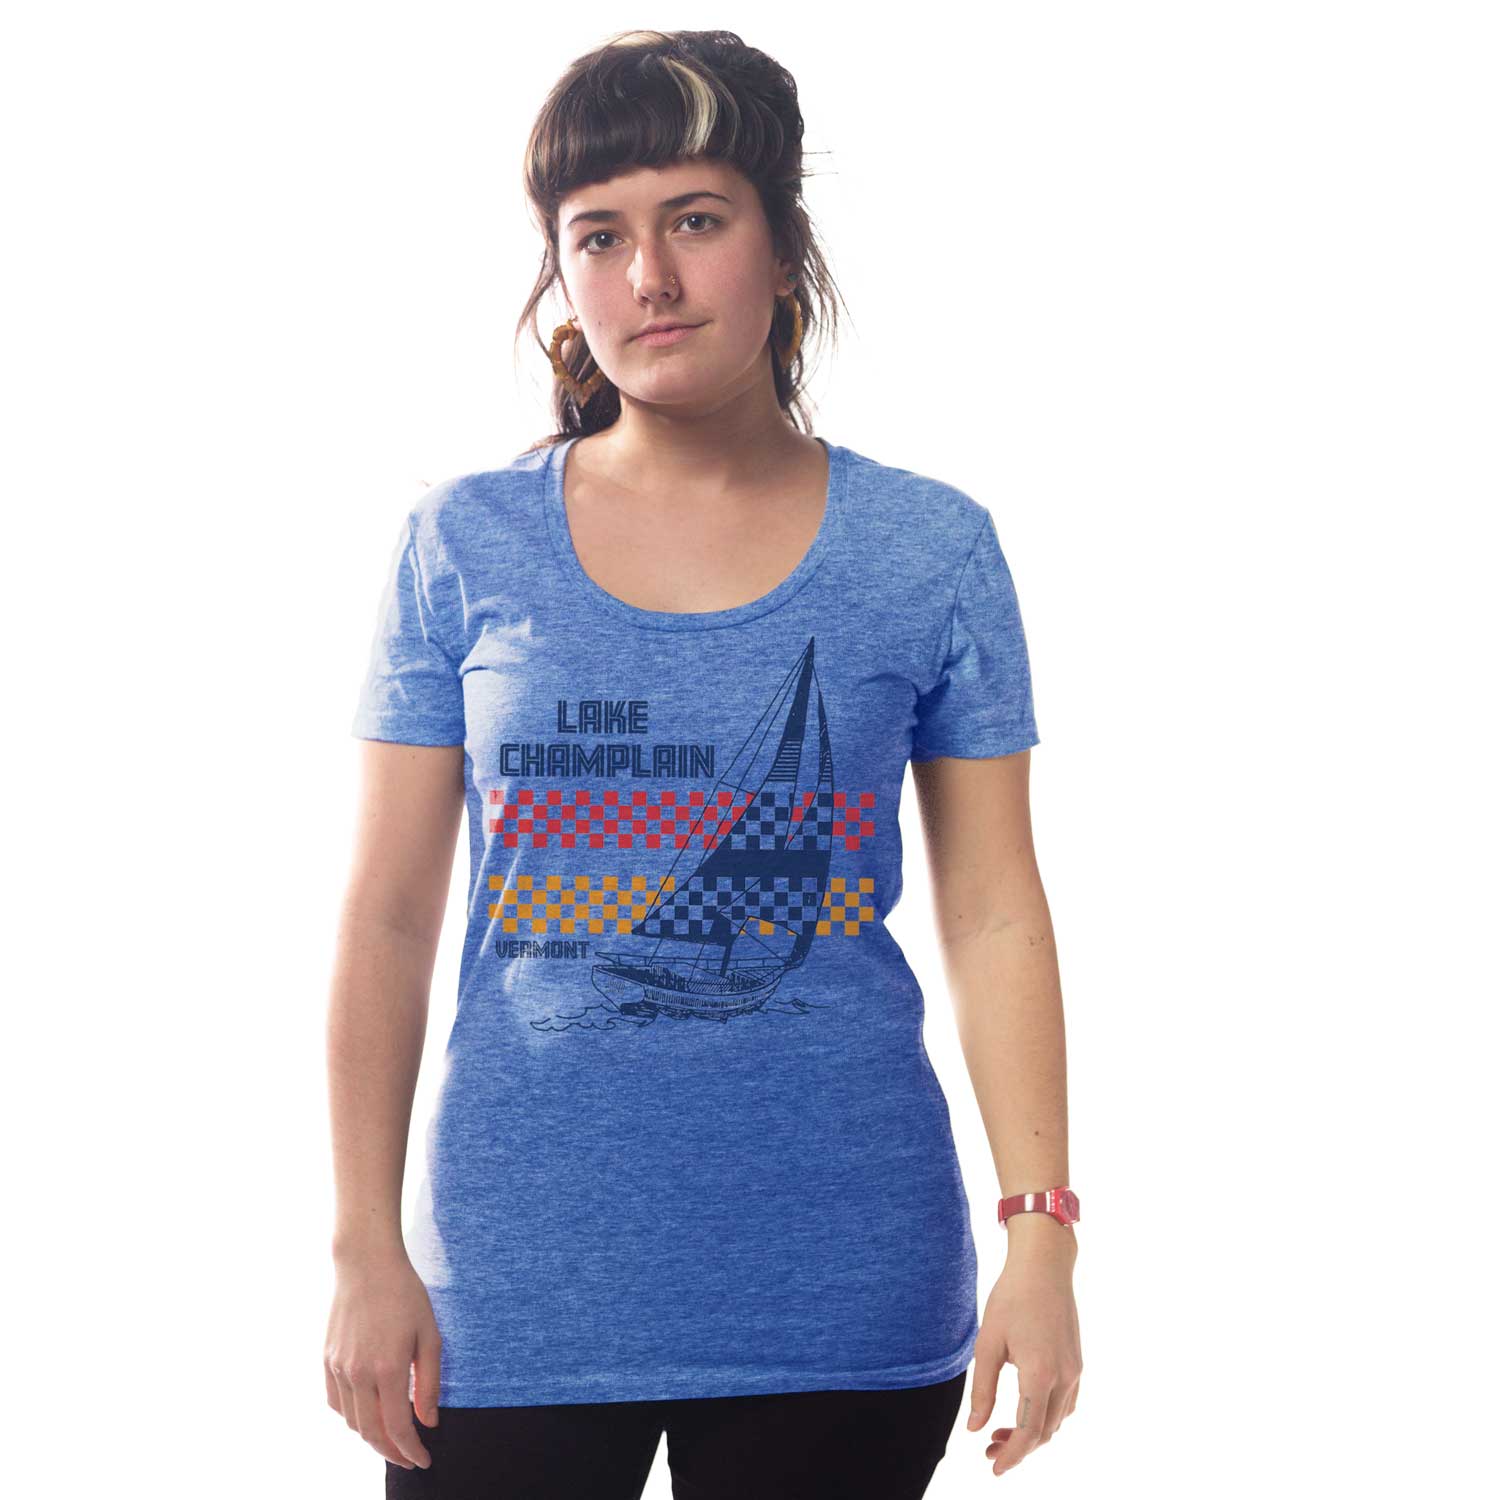 Women's Lake Champlain VT Sailboat Cool Graphic T-Shirt | Retro Vermont Tee on Model | Solid Threads